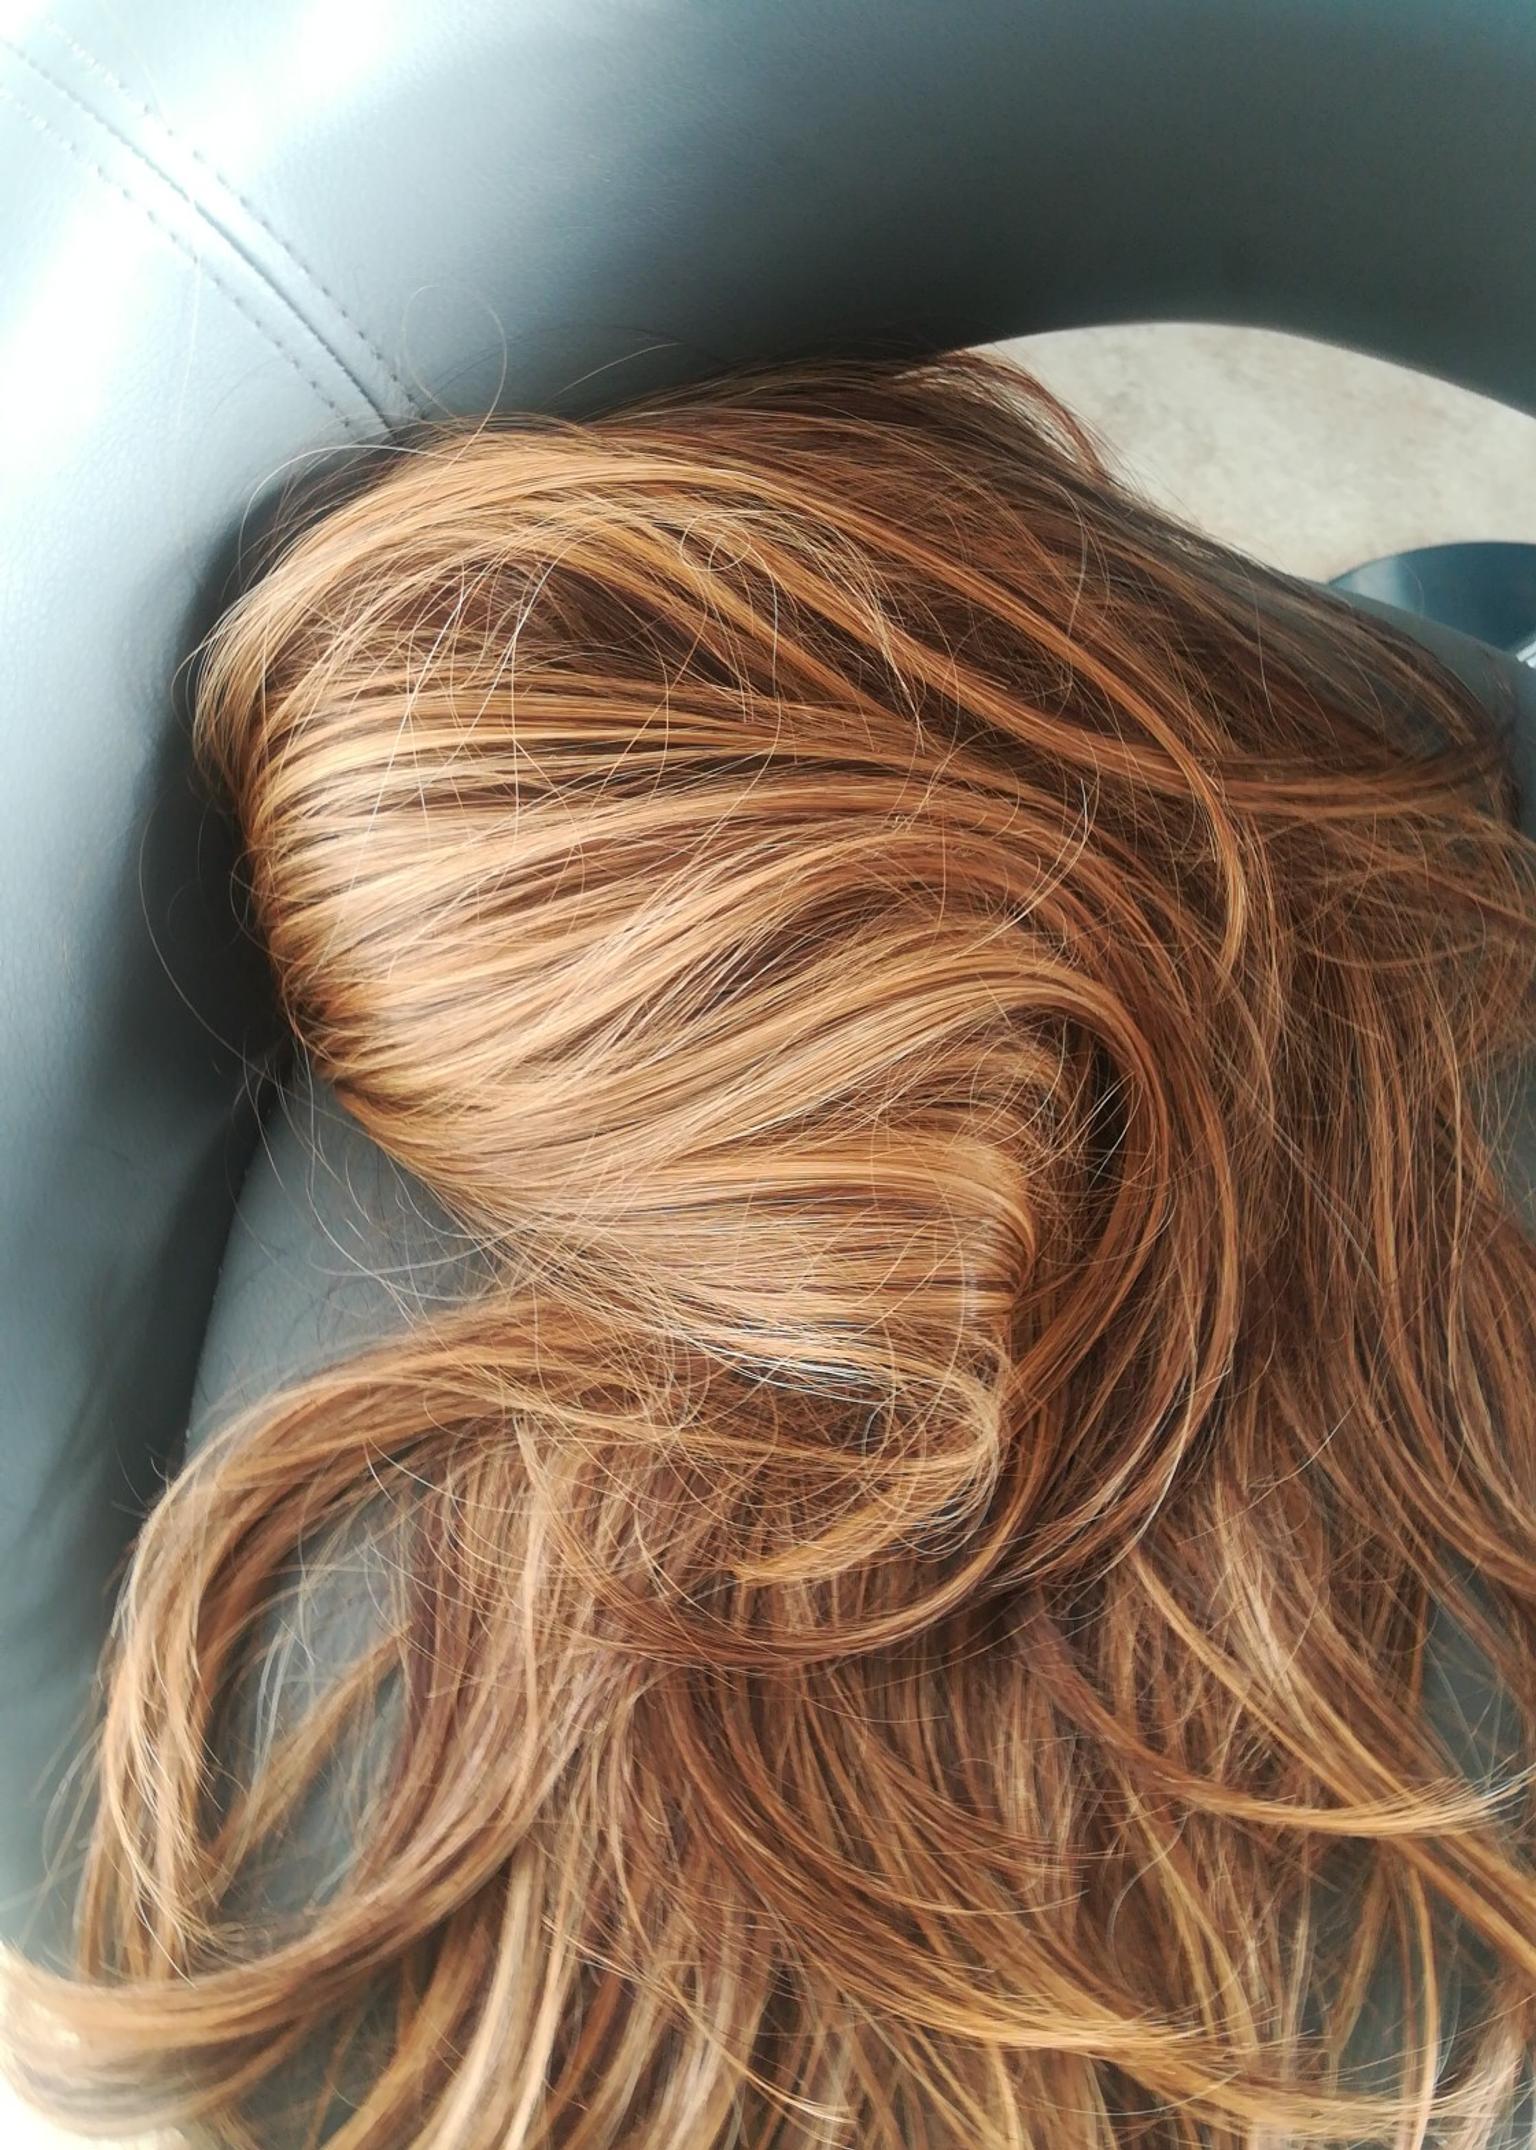 Wigs False Long Piece In L35 Helens For 5 00 For Sale Shpock